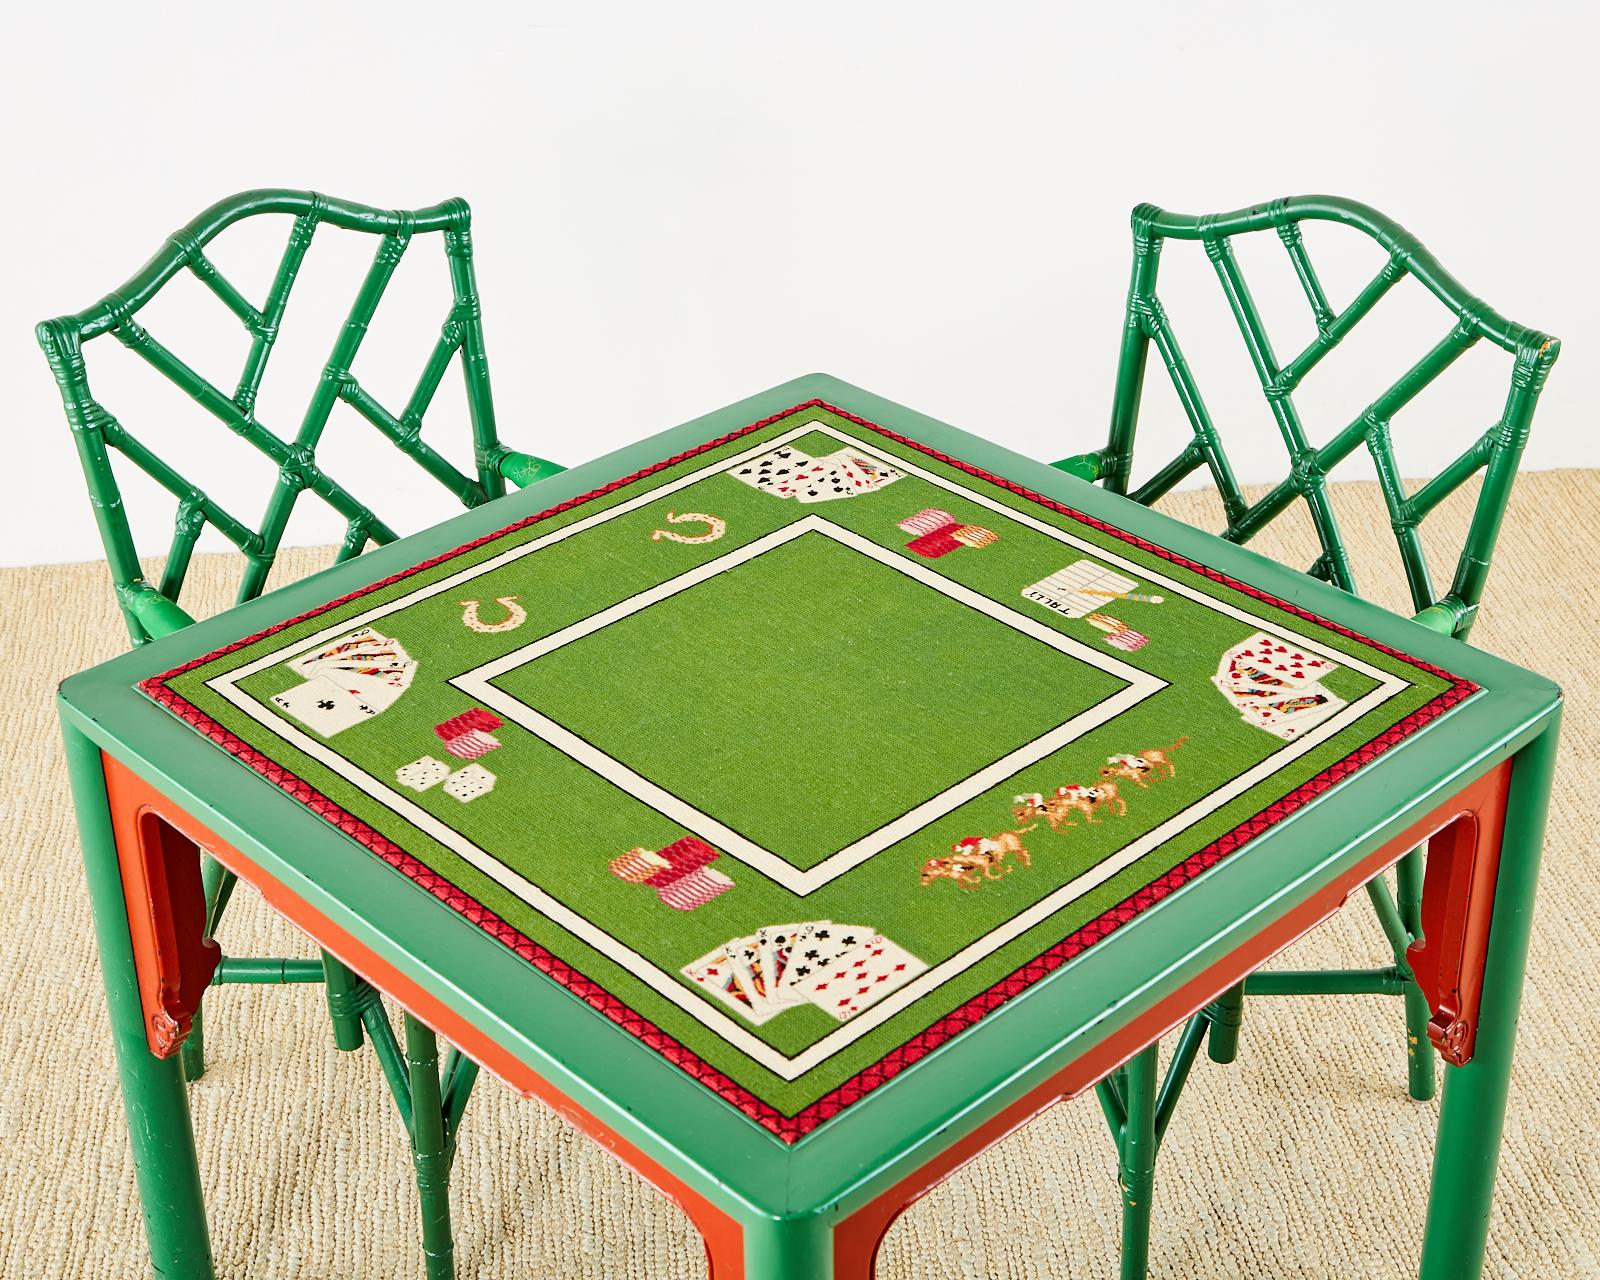 Maximalist Mid-Century Modern poker games table featuring a Trompe l'oeil needlepoint top depicting playing cards, racehorses, chips, horseshoes, and dice. The square table has a lucky green lacquered finish with Asian Style red spandrels adding to